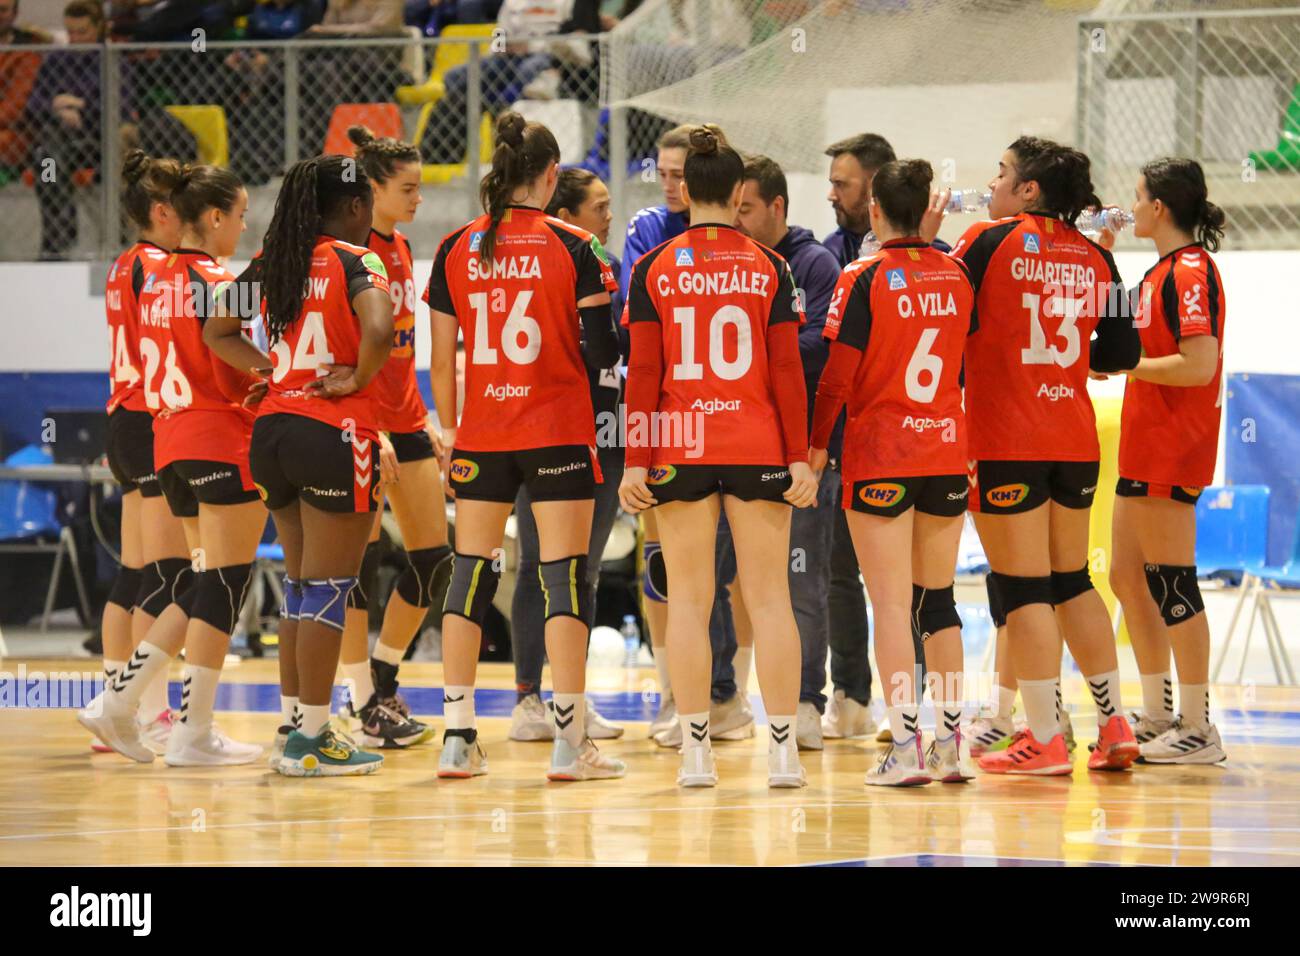 Oviedo, Spain, December 29, 2023: The KH-7 BM players. Granollers receive instructions during a time-out during the 13th Matchday of the Iberdrola Guerreras League between Lobas Global Atac Oviedo and KH-7 BM. Granollers, on December 29, 2023, at the Florida Arena Municipal Sports Center, in Oviedo, Spain. Credit: Alberto Brevers / Alamy Live News. Stock Photo